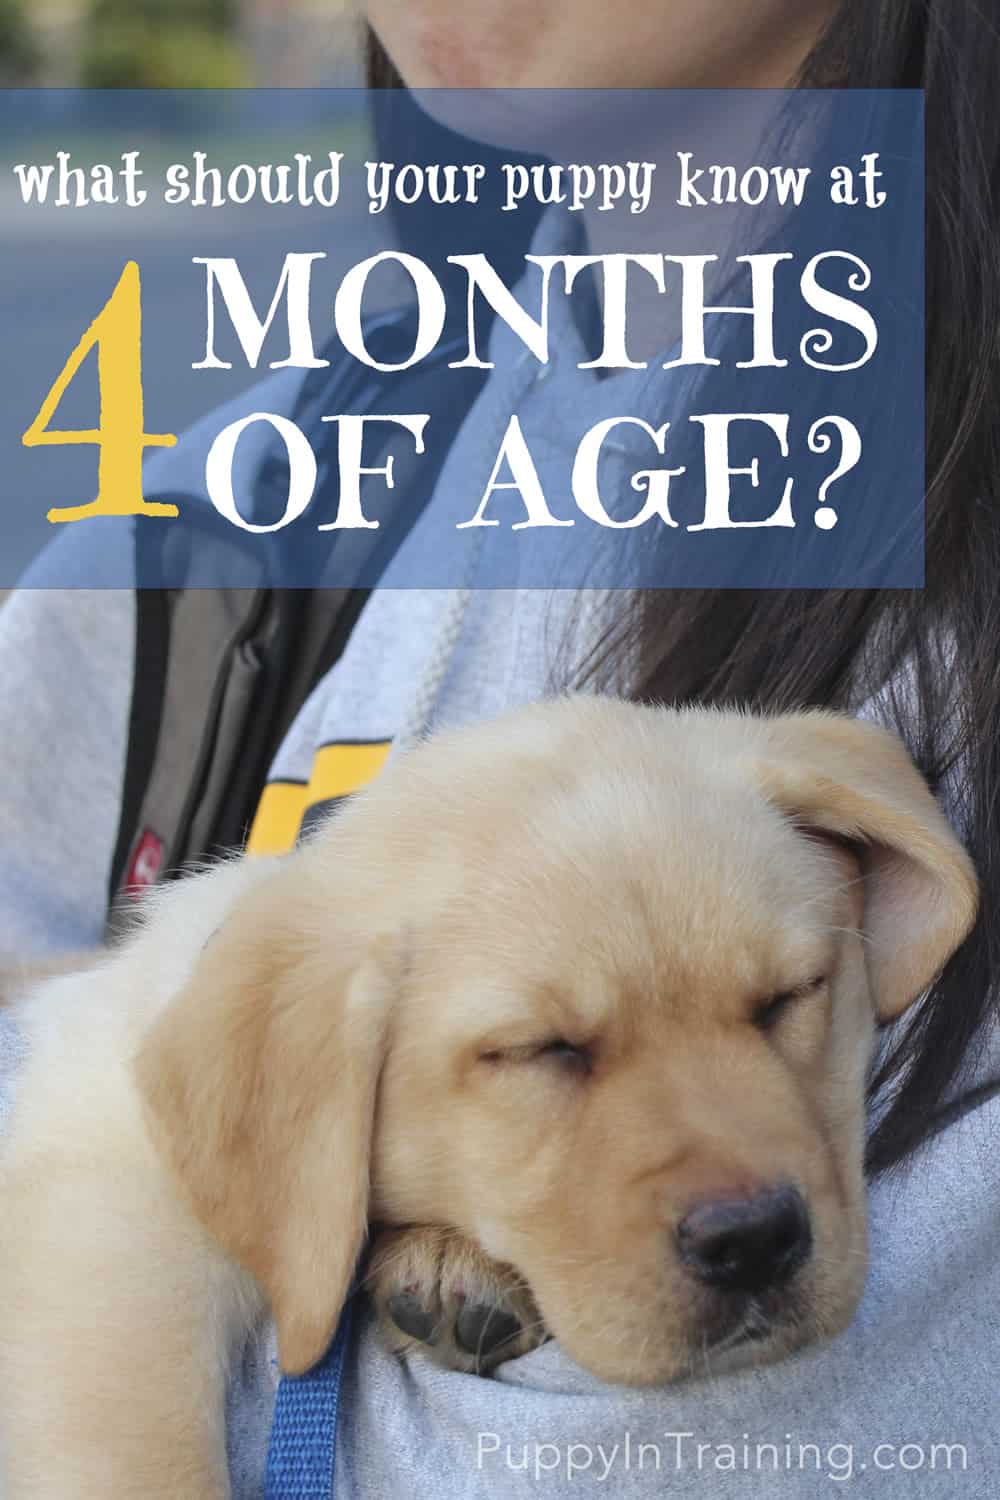 What Should Your Puppy Know At 4 Months Of Age? Puppy In